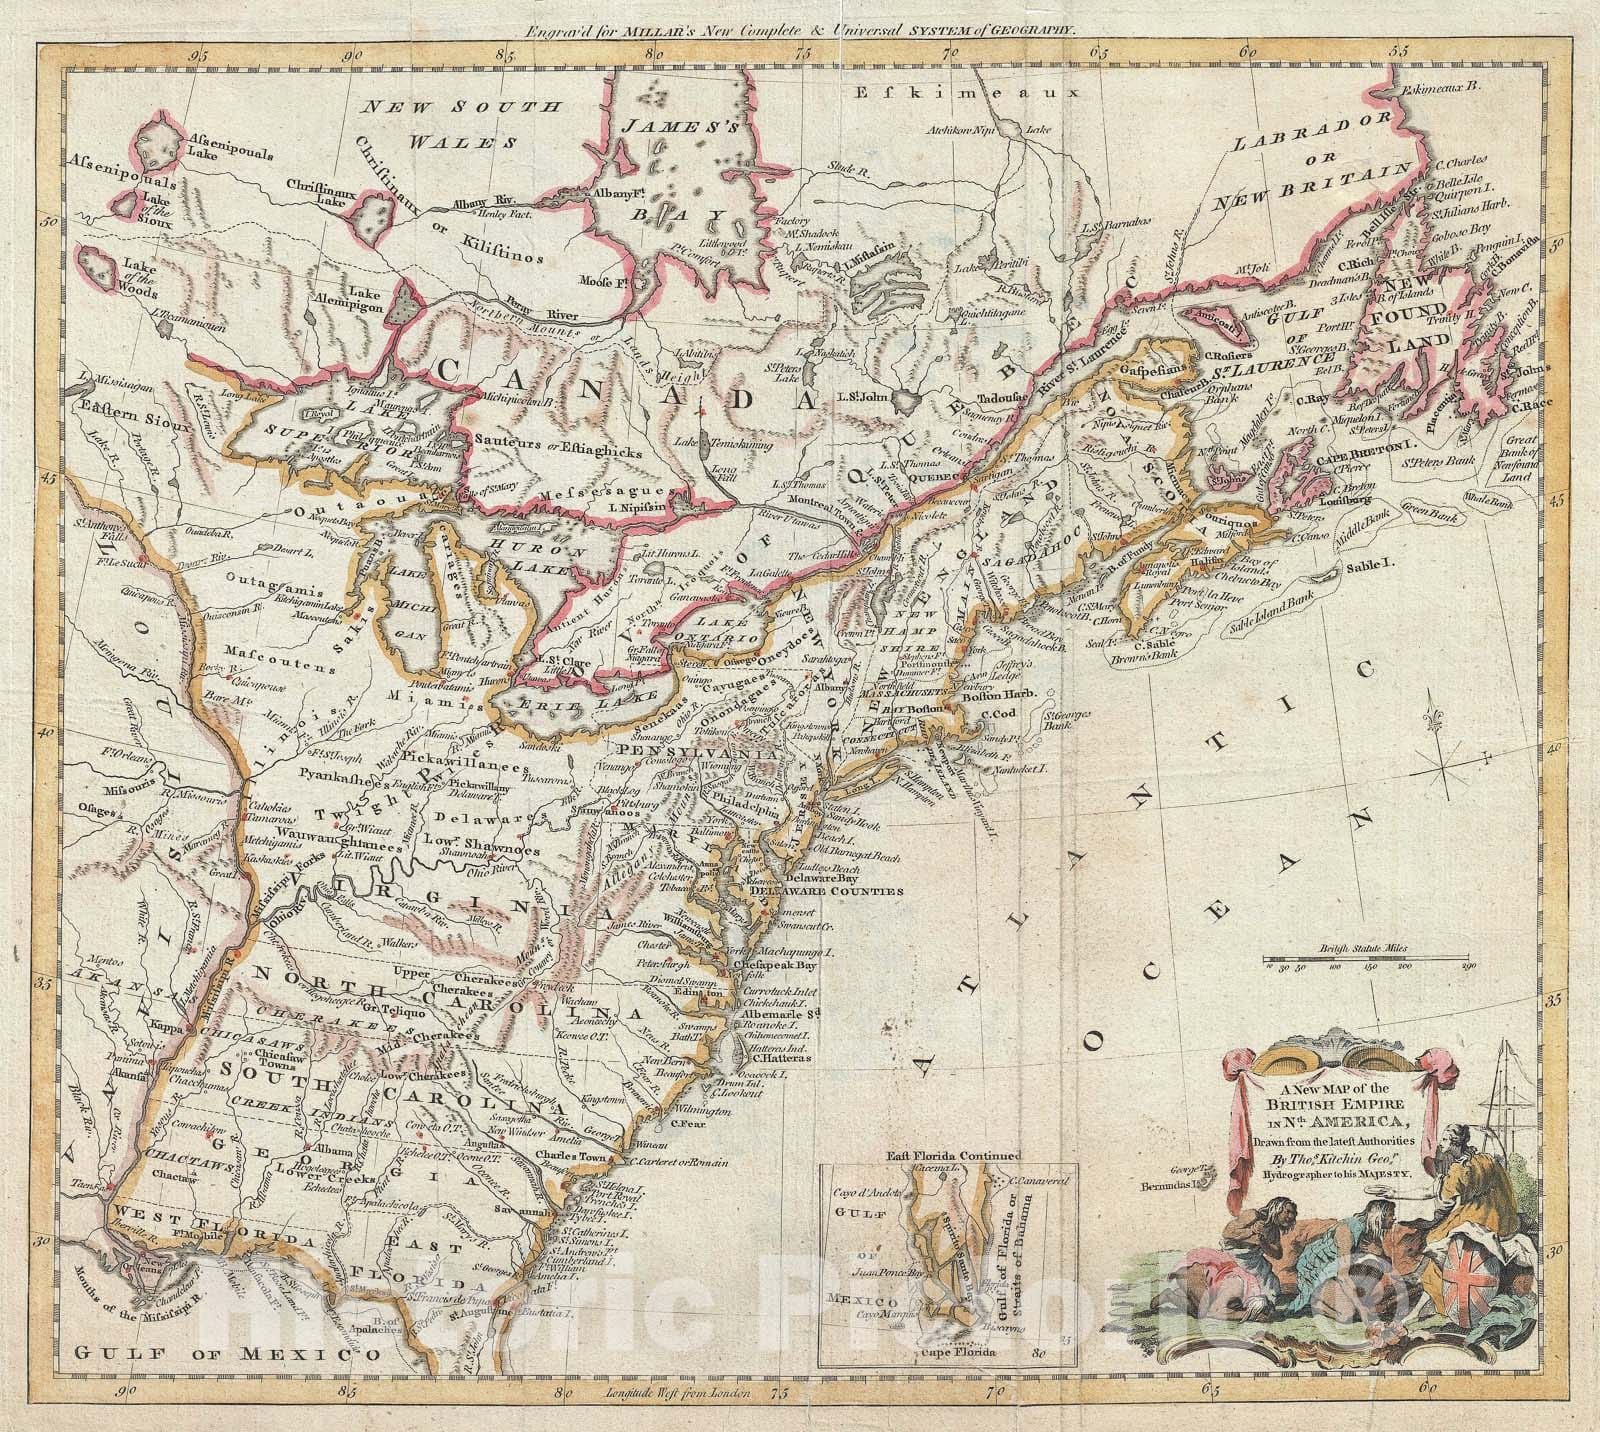 Historic Map : The United States or the "British Colonies in North Amerrica", Kitchin, 1782, Vintage Wall Art